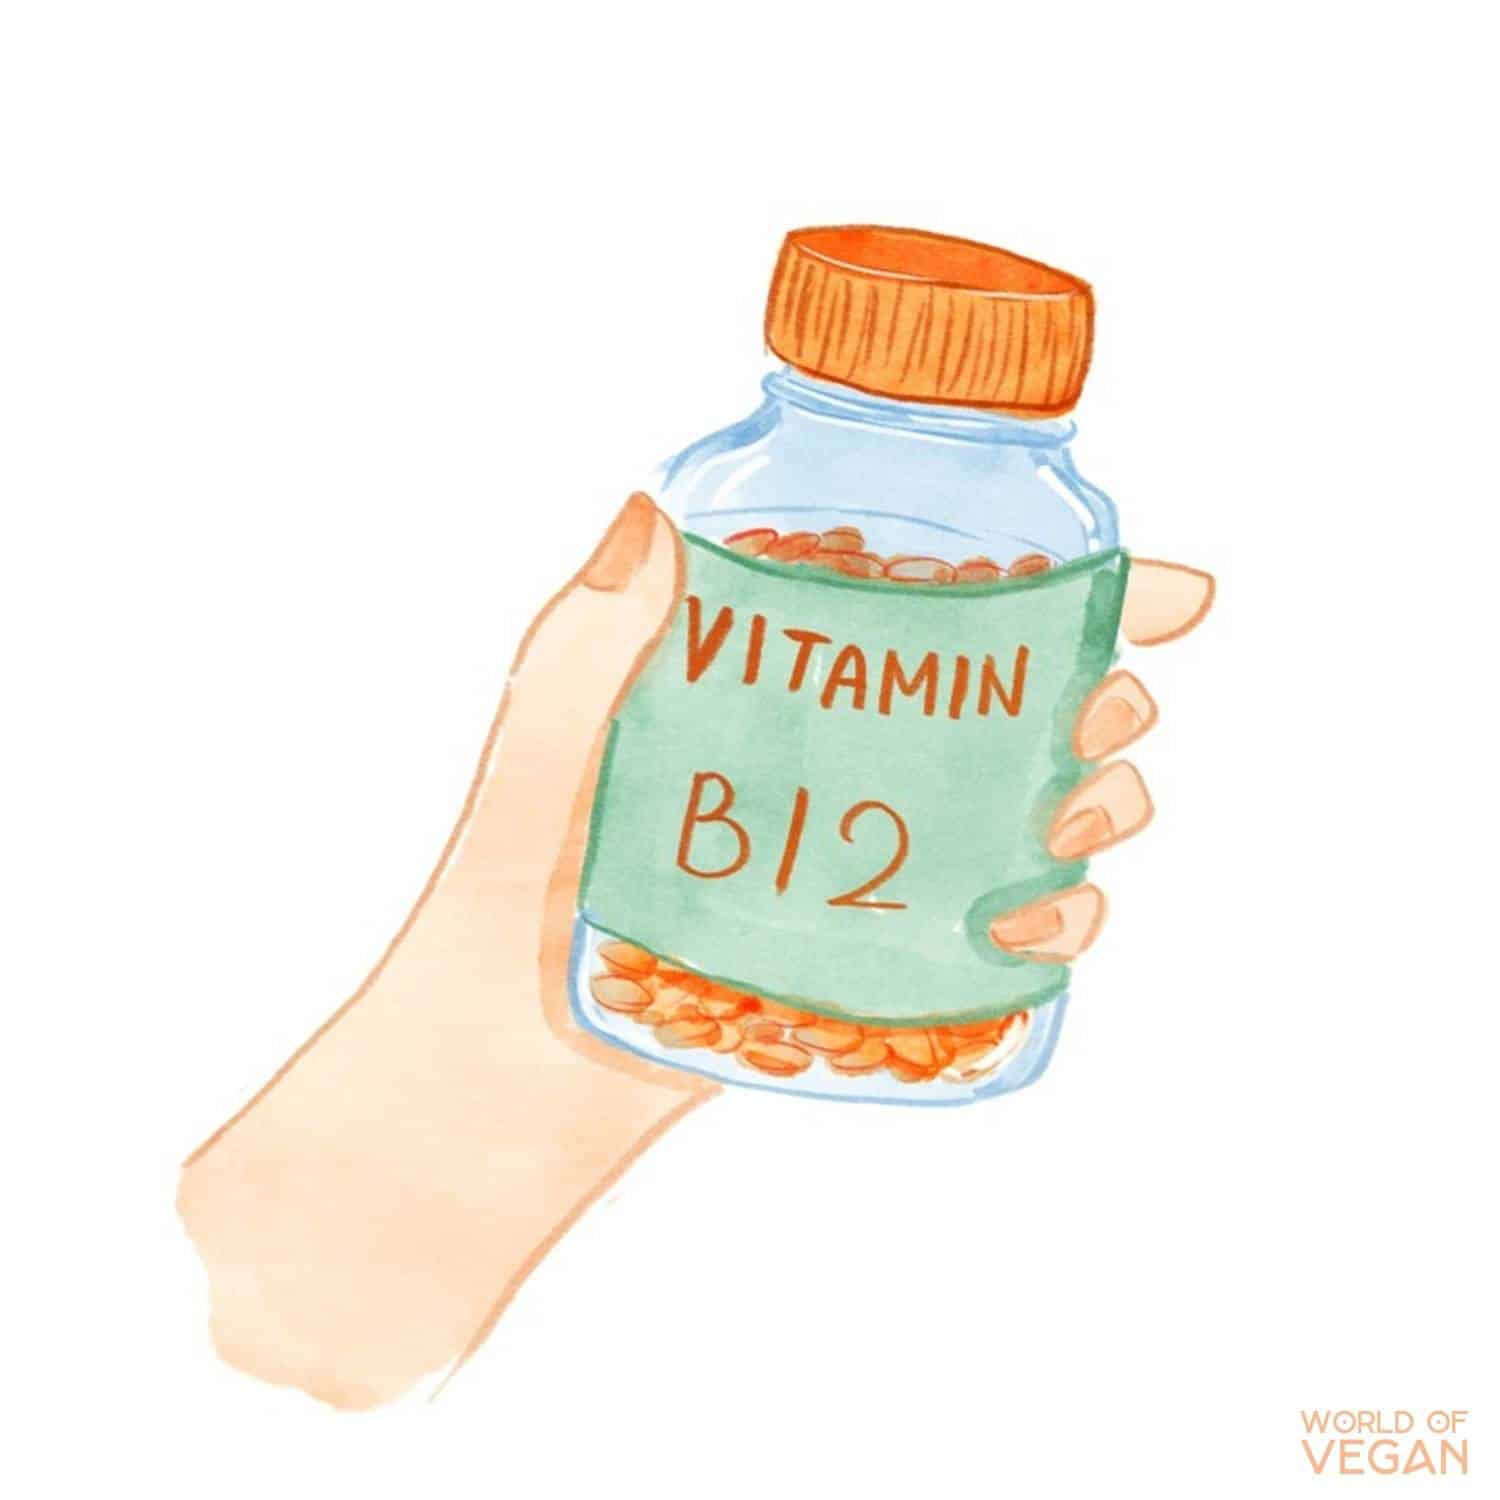 Illustrated art graphic of a hand holding a vitamin b12 bottle.